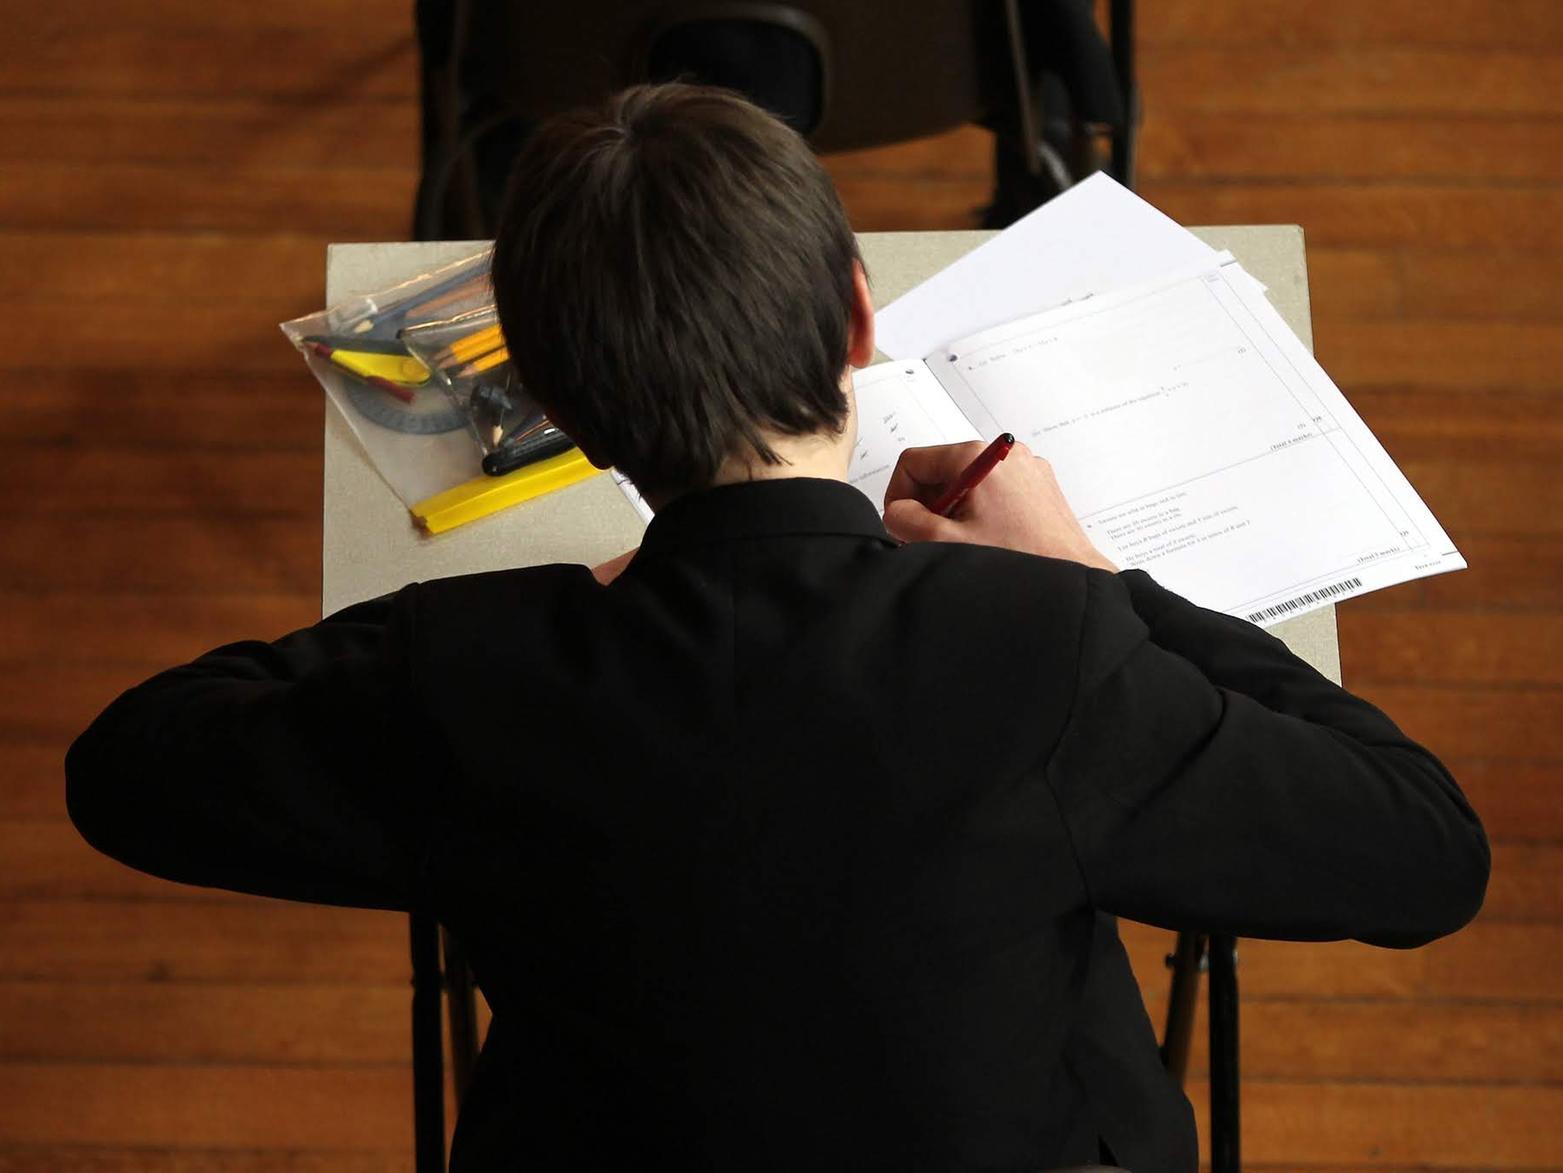 The 10 worst-performing schools in Leeds for GCSE results revealed by government figures (Photo: PA)